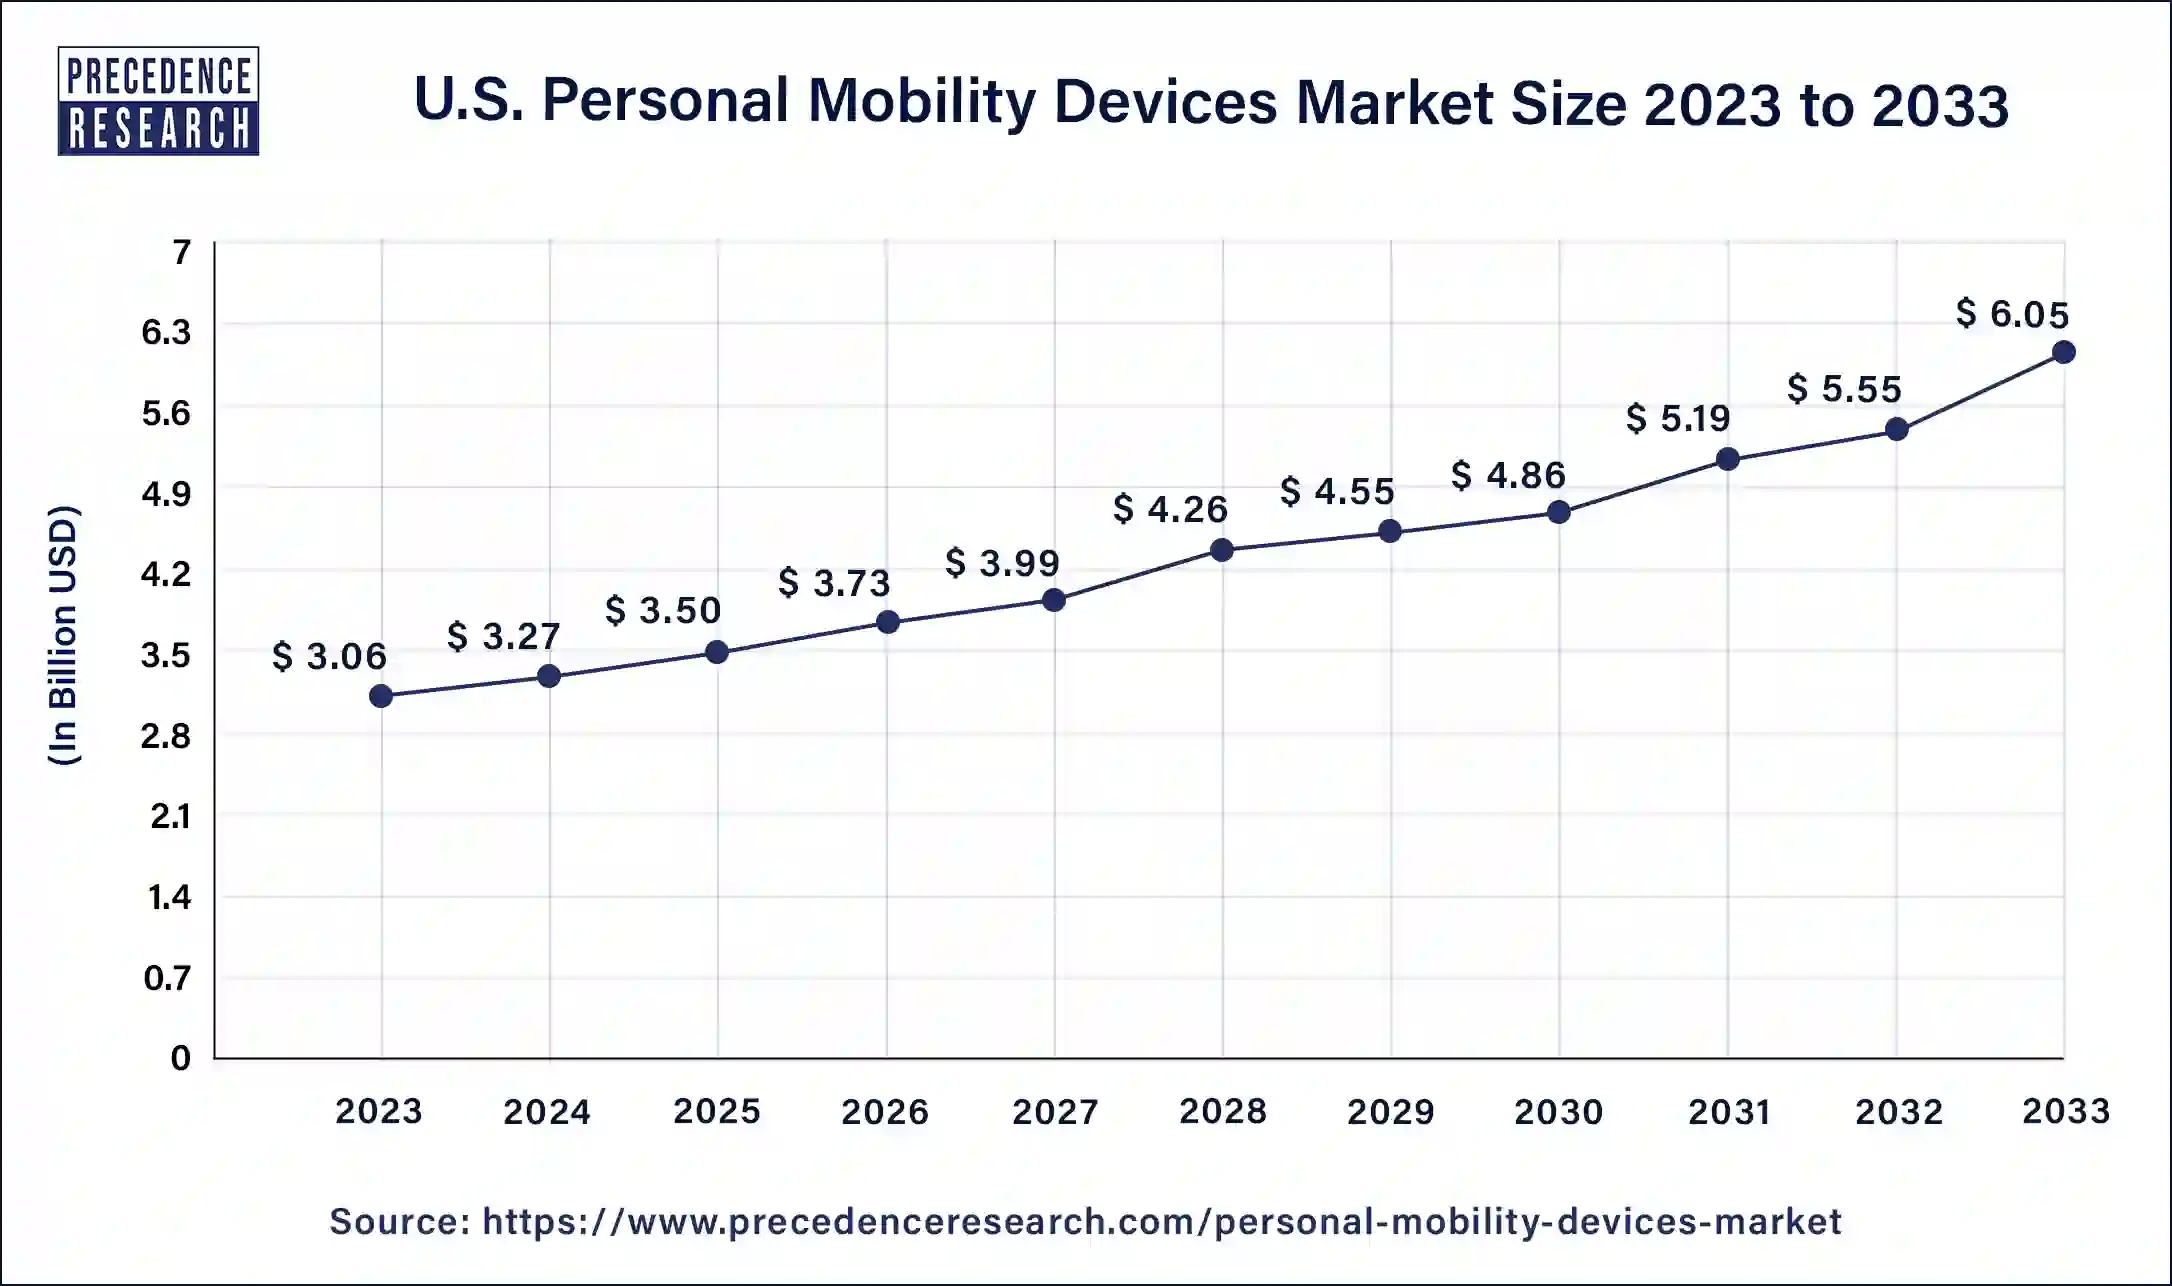 U.S. Personal Mobility Devices Market Size 2024 to 2033